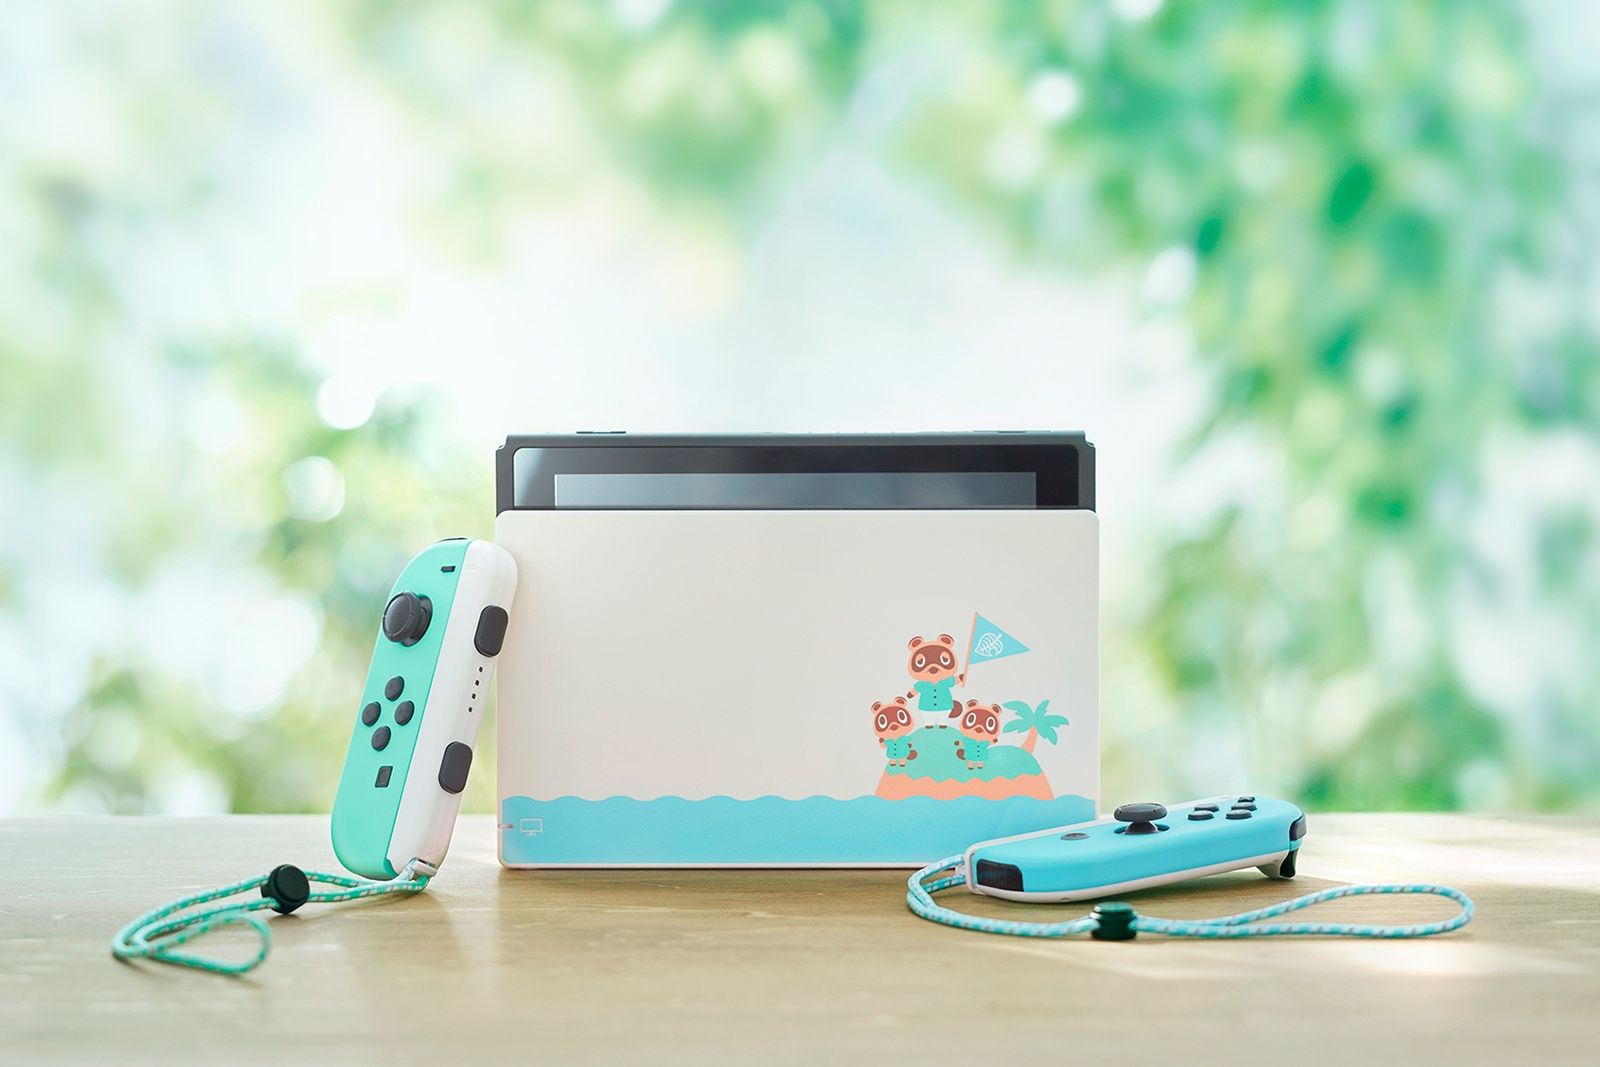 Nintendo Unveils A Gorgeous Limited Edition Switch For Animal Crossing New Horizons image 1